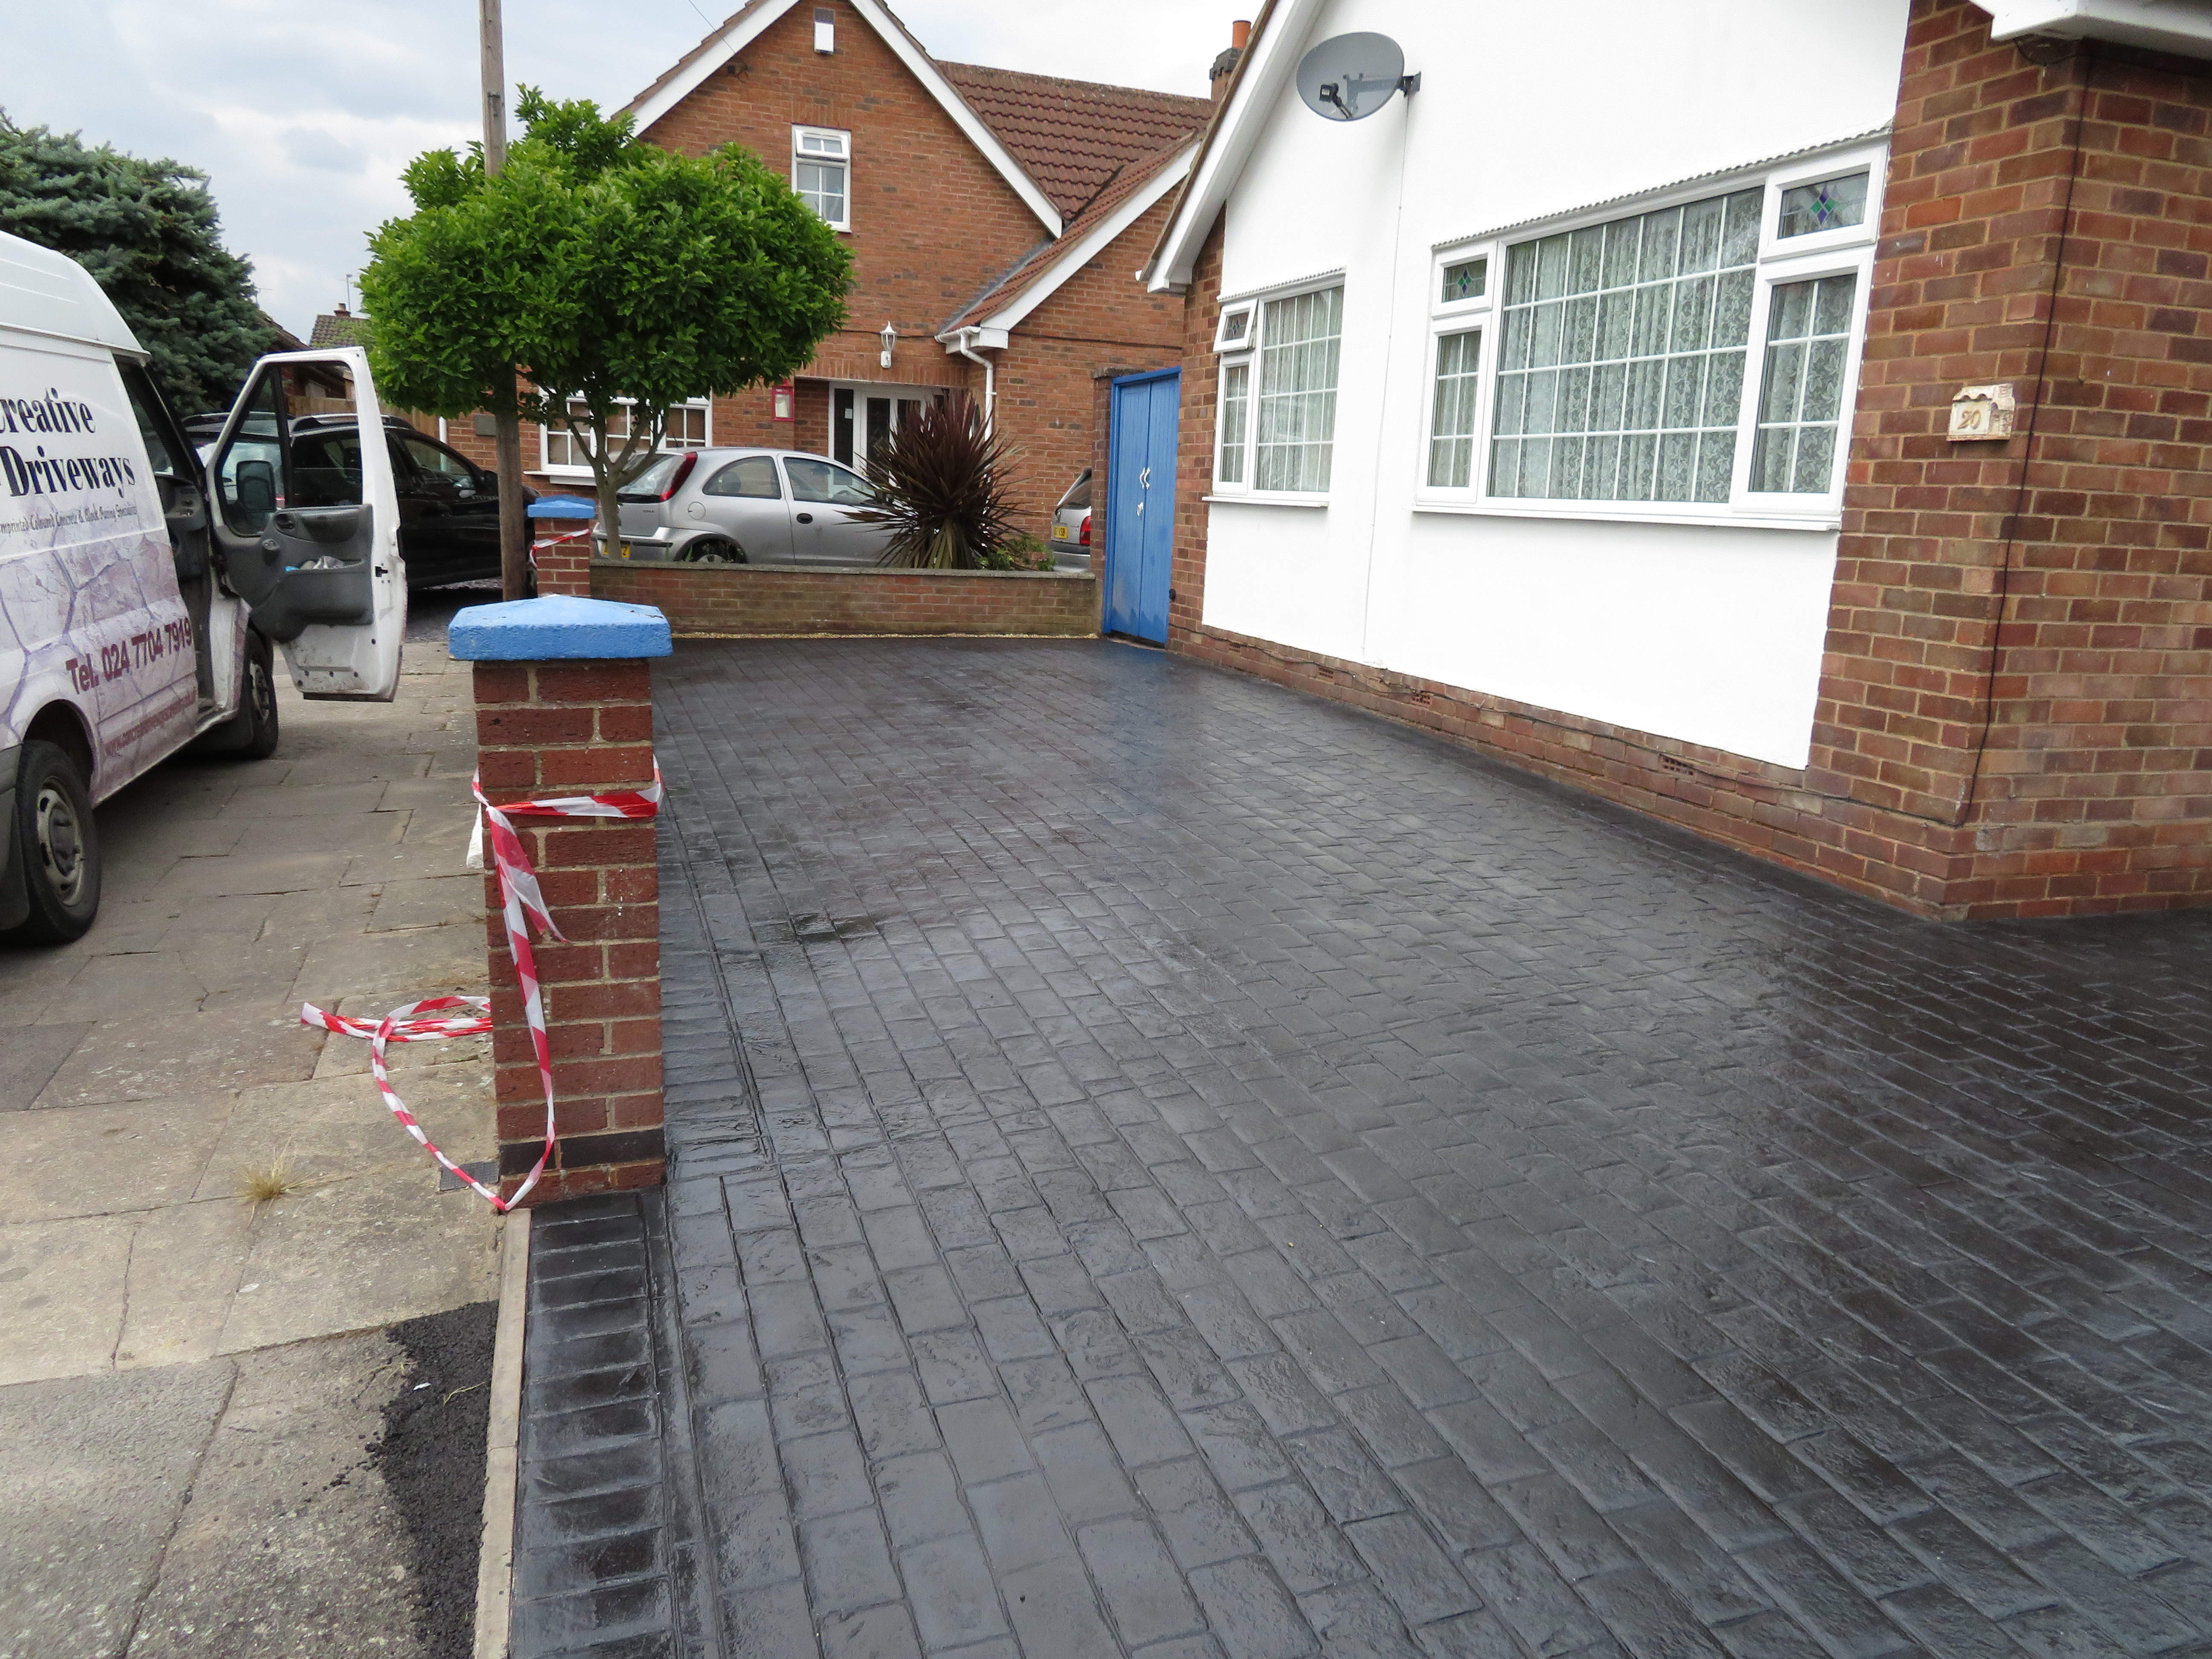 Pattern Imprinted Concrete Driveway done in a Textured Cobble Pattern